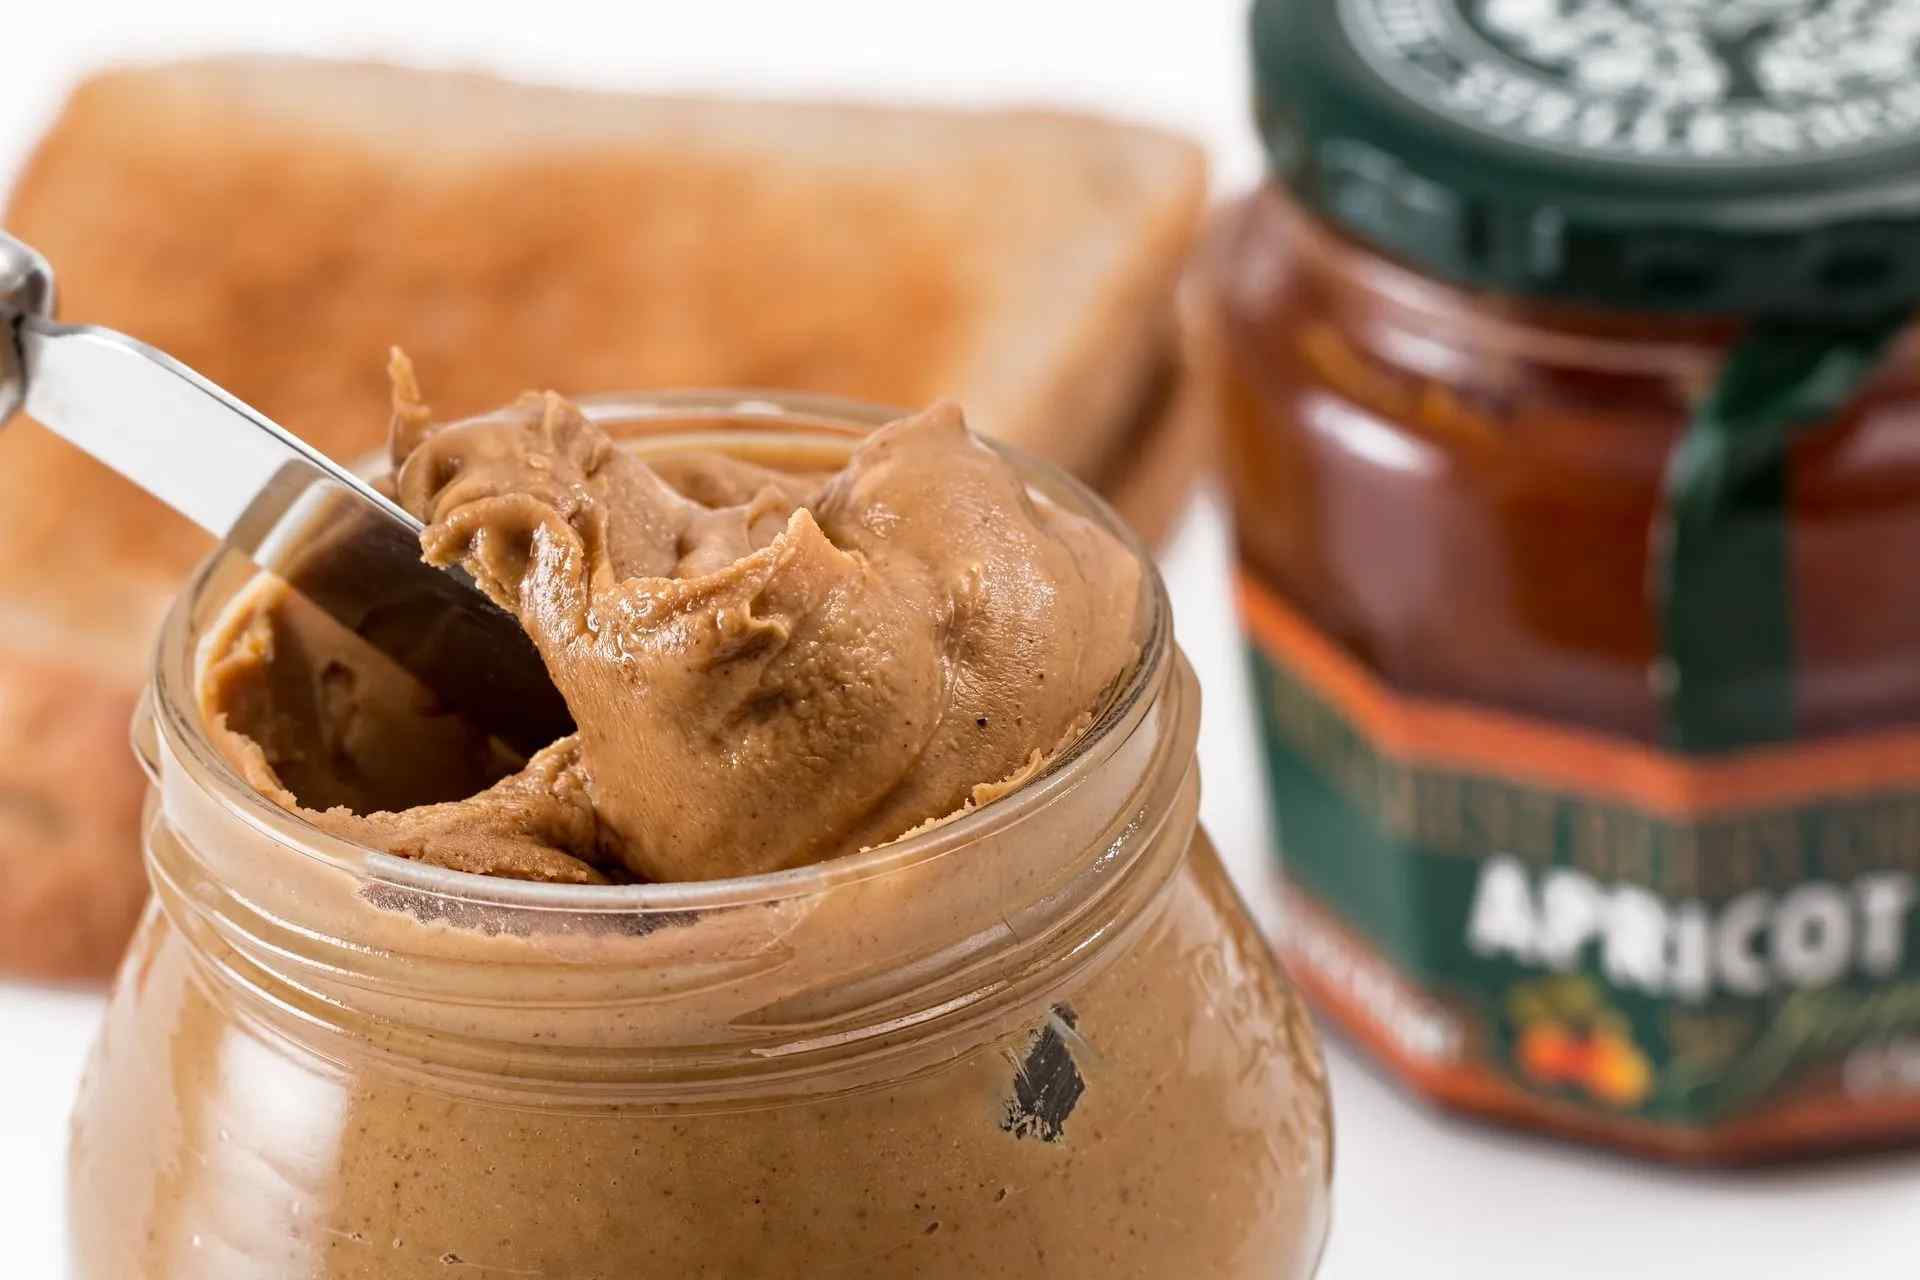 Peanut butter can help reduce cholesterol and manage weight.